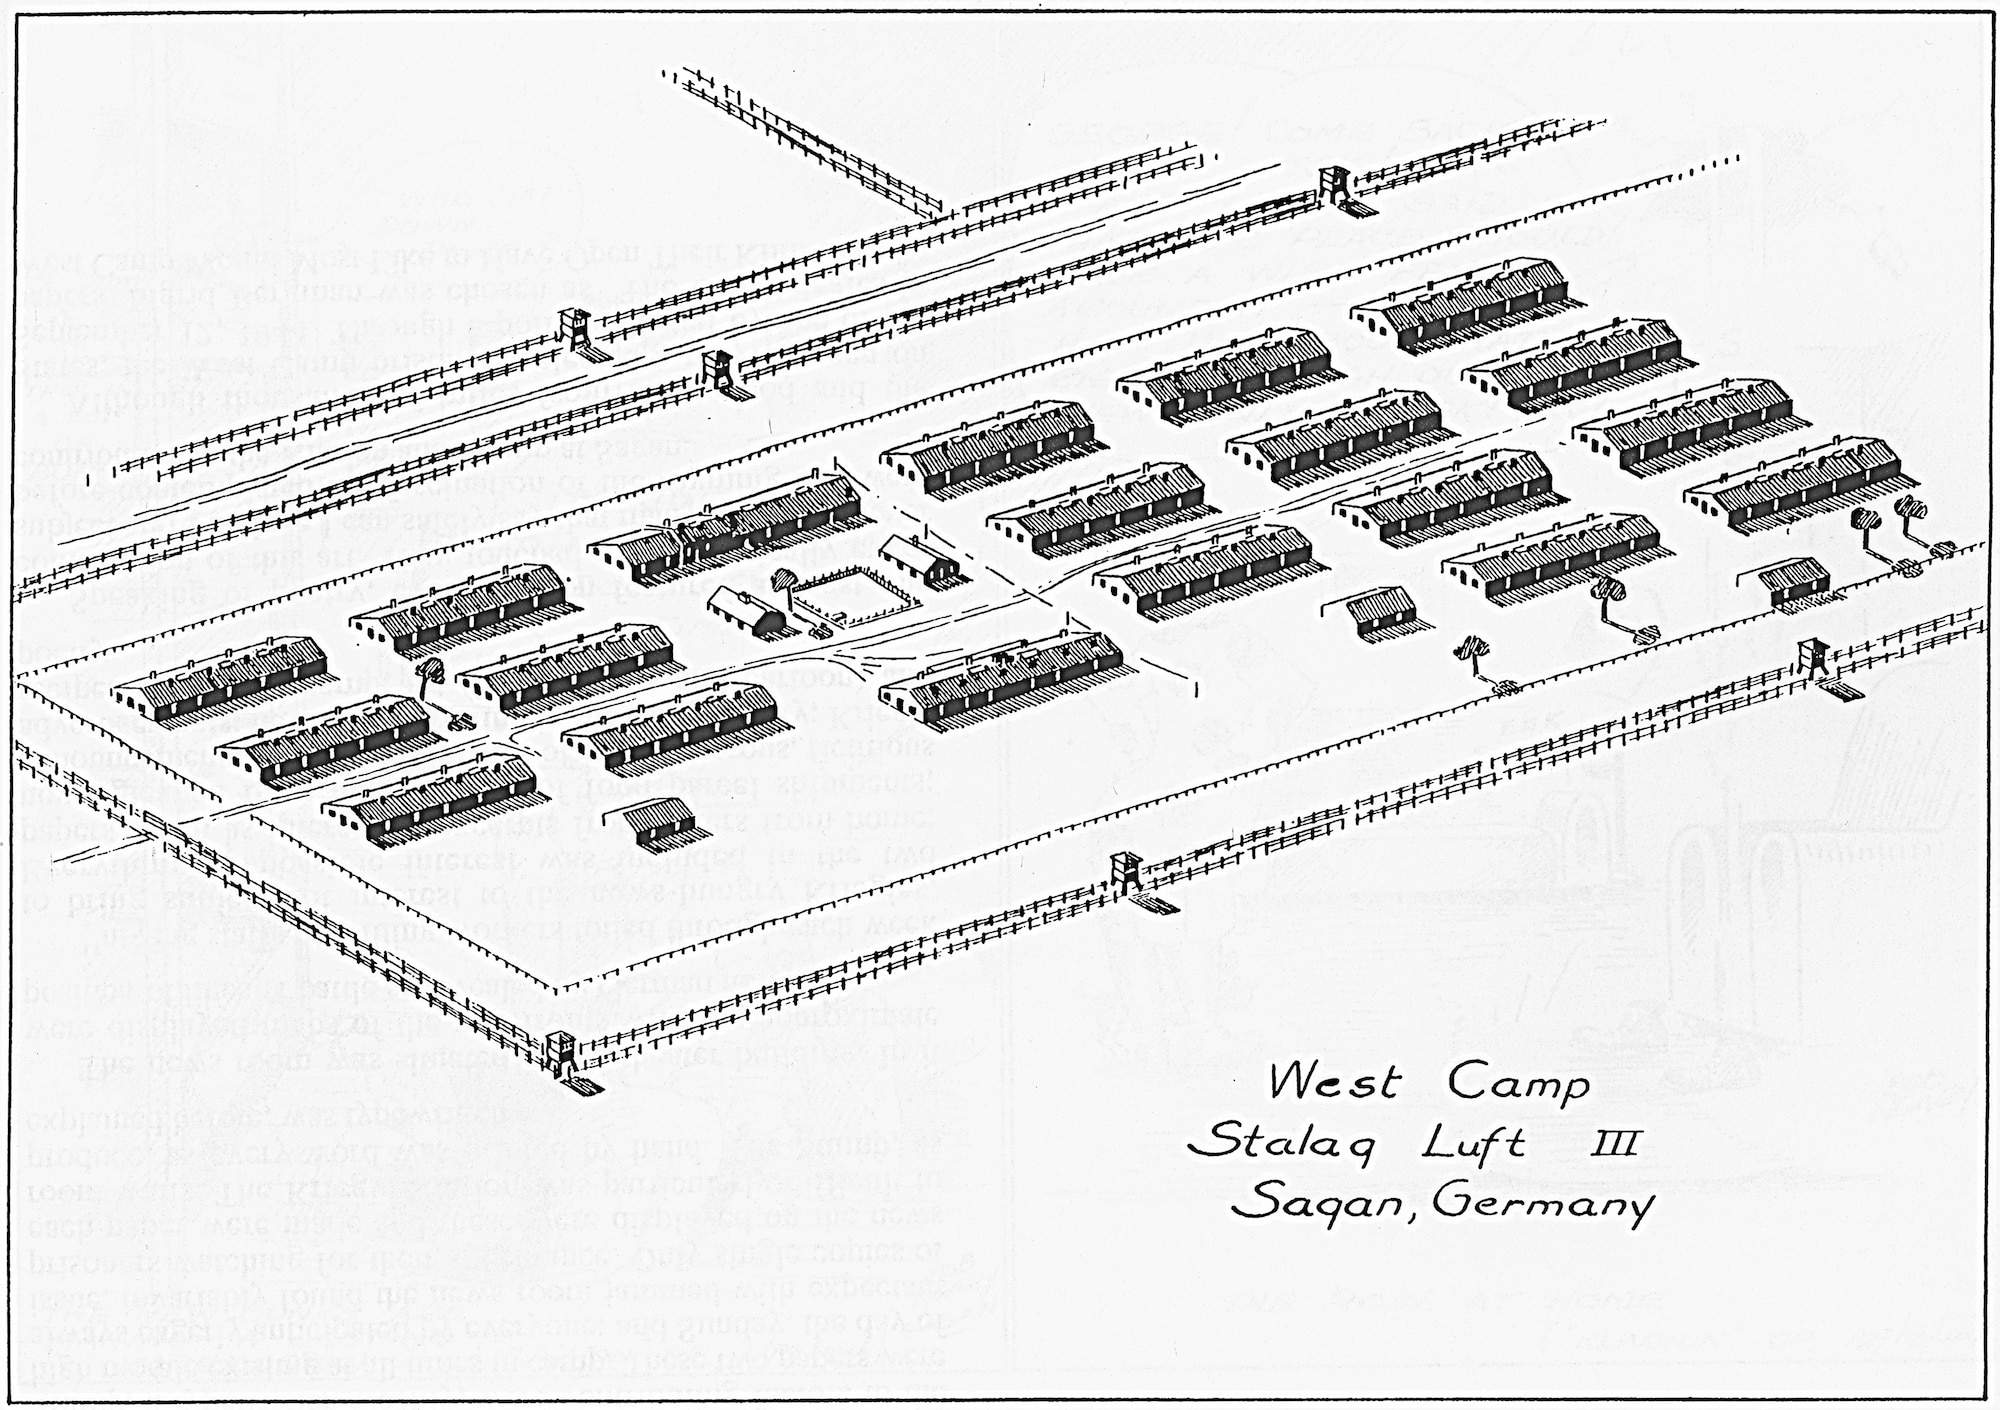 A sketch of the west compound at Stalag Luft III, one of six compounds used to hold allied prisoners of war. More than 10,000 officer Airmen, including more than 6,800 American officers, were held at the camp until the Russian push into eastern Germany forced an evacuation of the prisoners by foot at midnight on Jan. 28, 1945 during a blizzard. The German Luftwaffe personnel running the camp were determined to prevent the liberation of the highly-trained Airmen by the rapidly advancing Russian Army and forced the prisoners to walk more than 62 miles in six days to other POW  camps.  (Courtesy of the Bob Neary Estate)